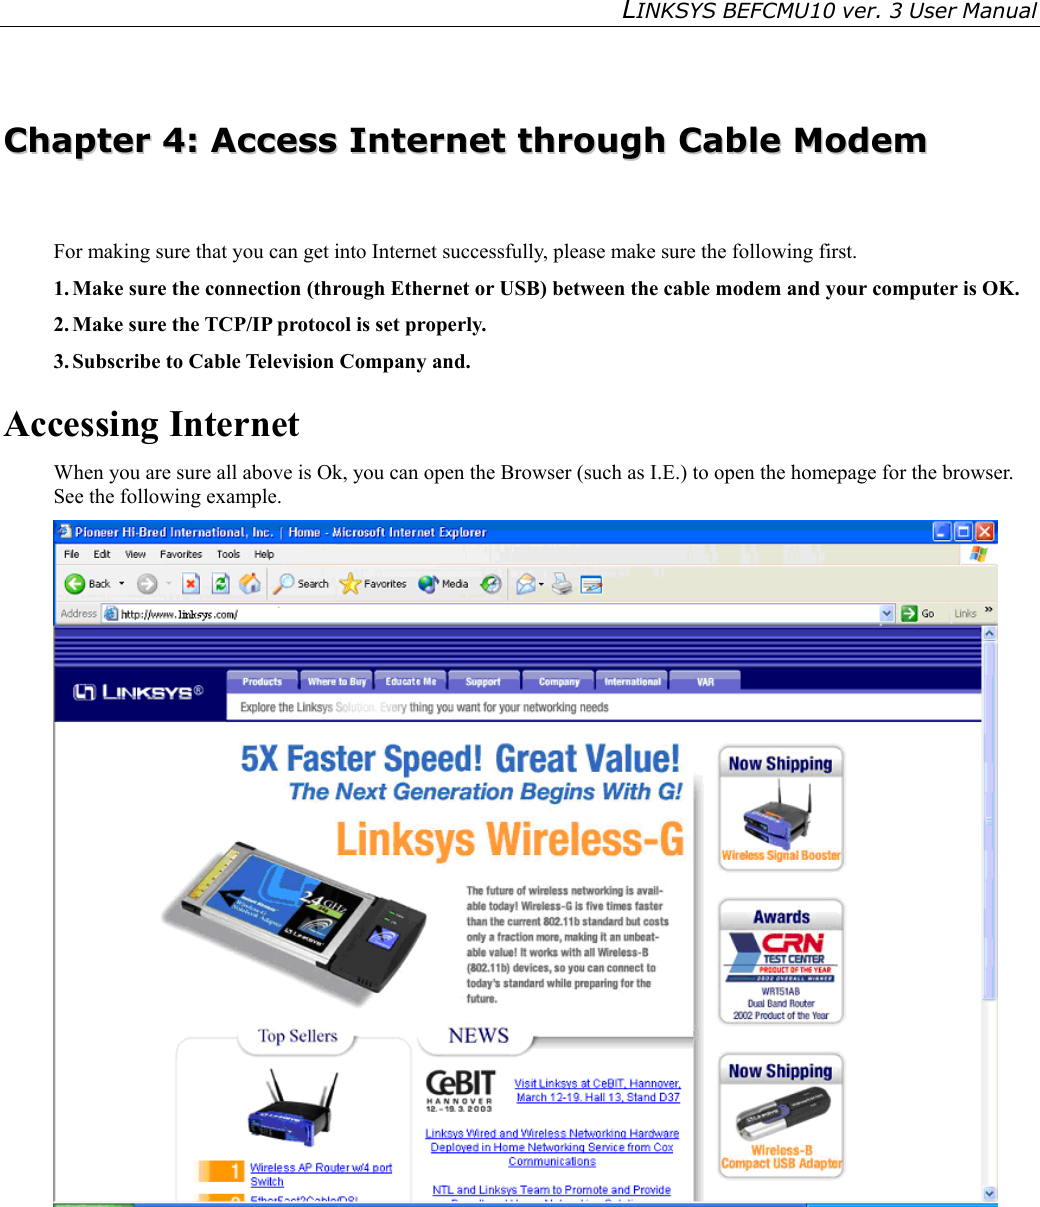 LINKSYS BEFCMU10 ver. 3 User Manual     CChhaapptteerr  44::  AAcccceessss  IInntteerrnneett  tthhrroouugghh  CCaabbllee  MMooddeemm  For making sure that you can get into Internet successfully, please make sure the following first. 1. Make sure the connection (through Ethernet or USB) between the cable modem and your computer is OK. 2. Make sure the TCP/IP protocol is set properly. 3. Subscribe to Cable Television Company and. Accessing Internet When you are sure all above is Ok, you can open the Browser (such as I.E.) to open the homepage for the browser. See the following example.  